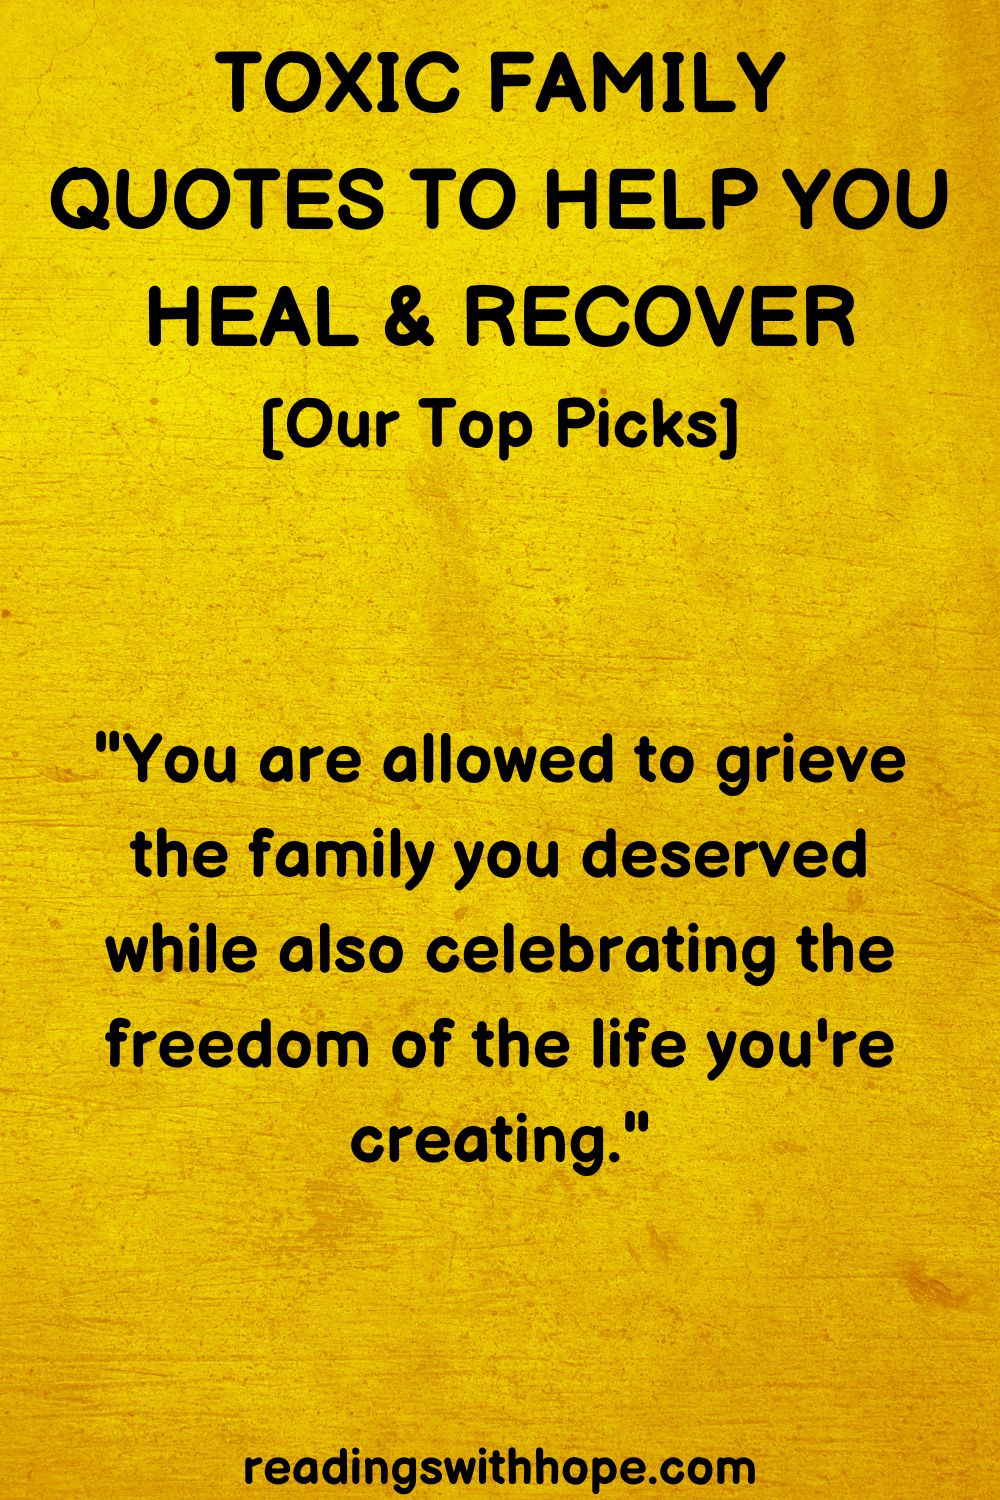 toxic family quotes to help heal and recover